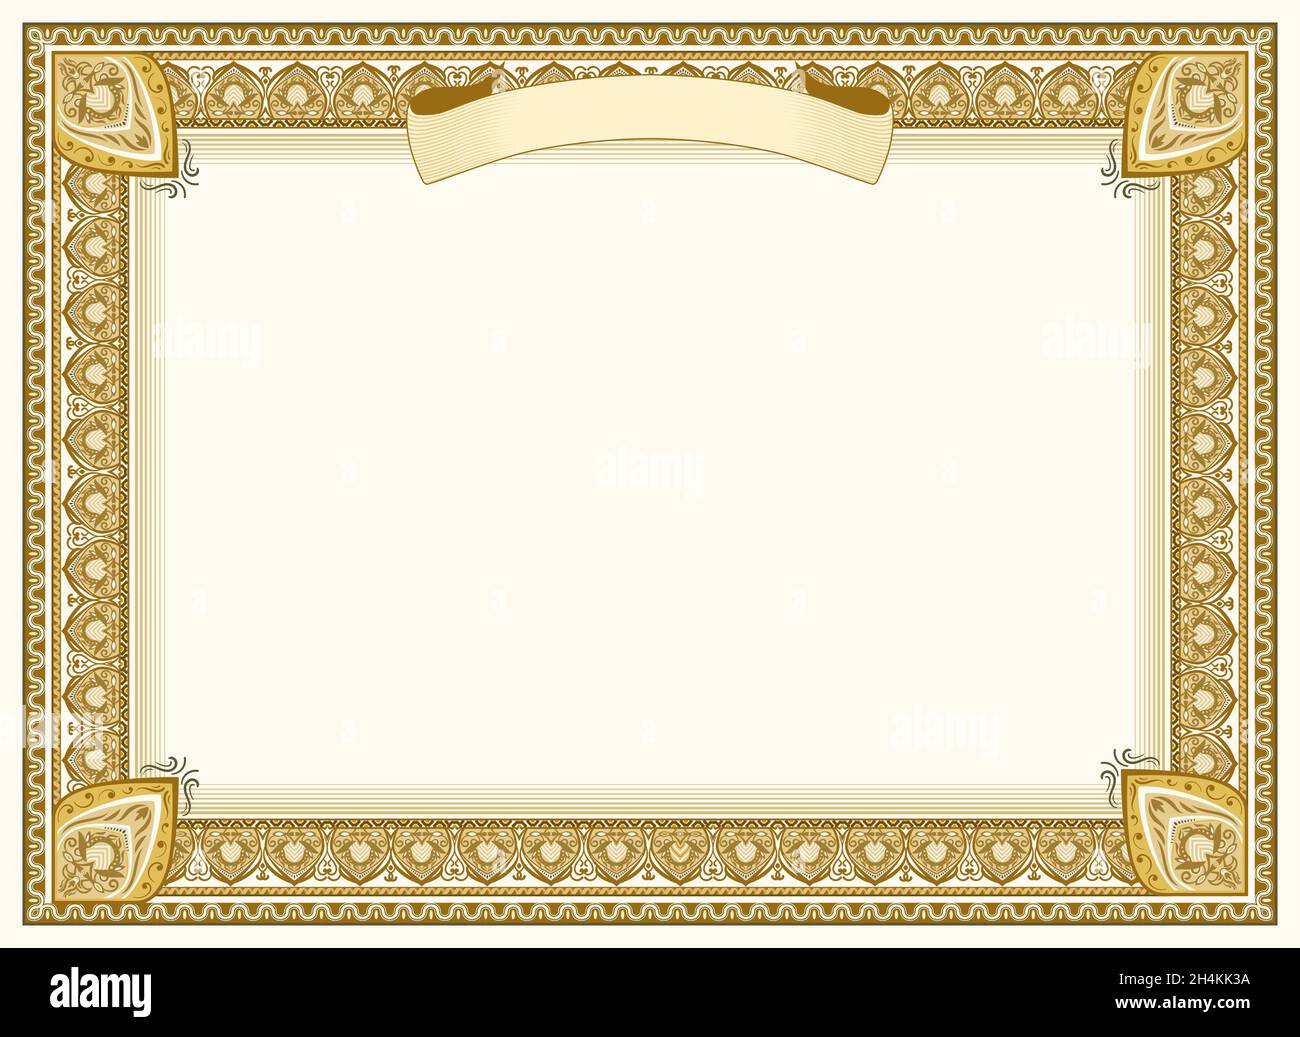 A4 Picture Frame Photo Frame Certificate Frame Multicolored Gold 